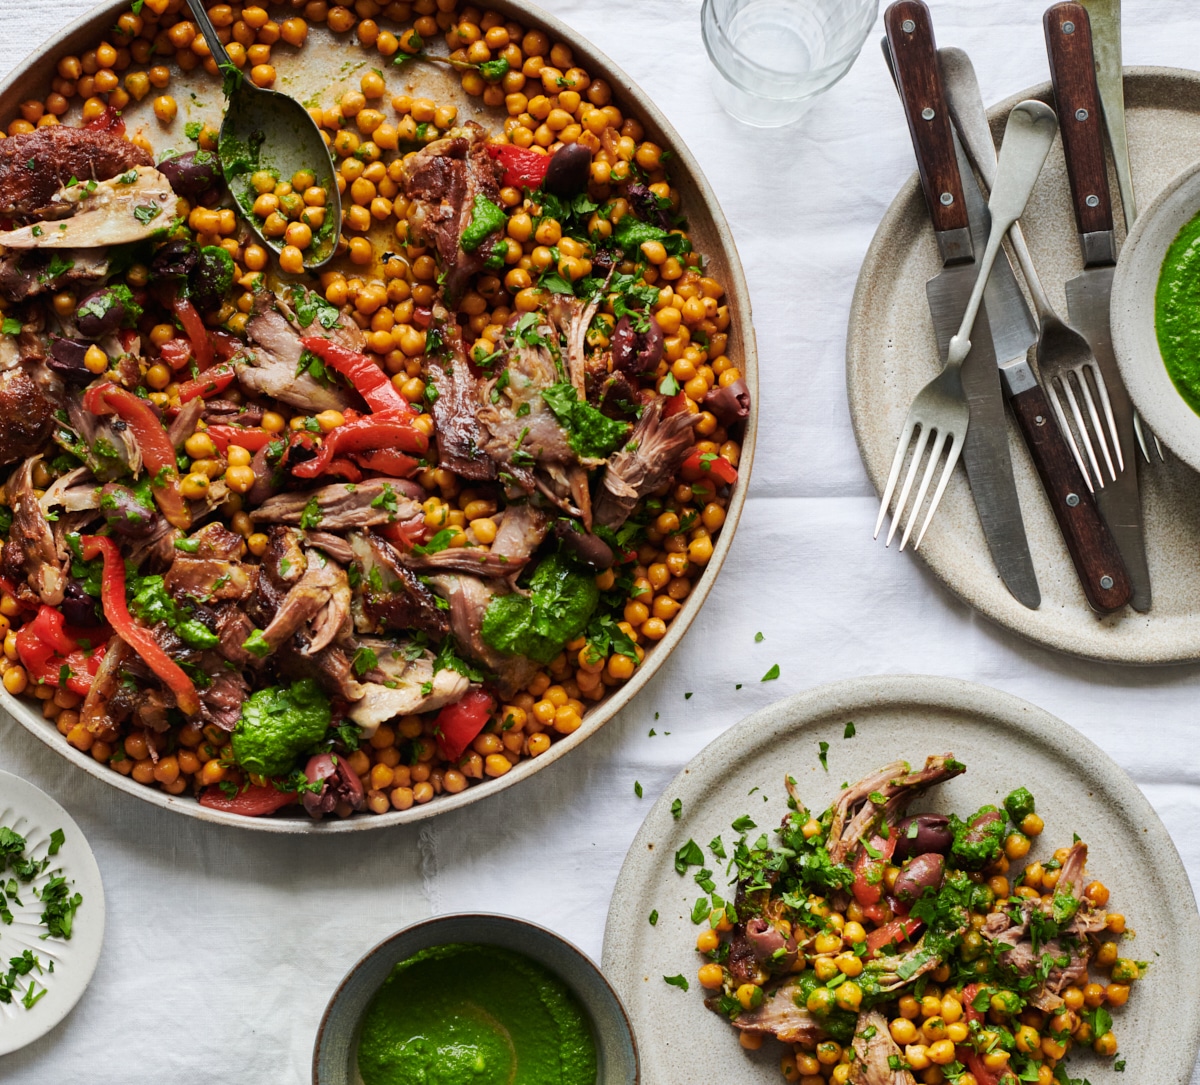 Slow-roasted shoulder of lamb with beans made with Borough Market ingredients